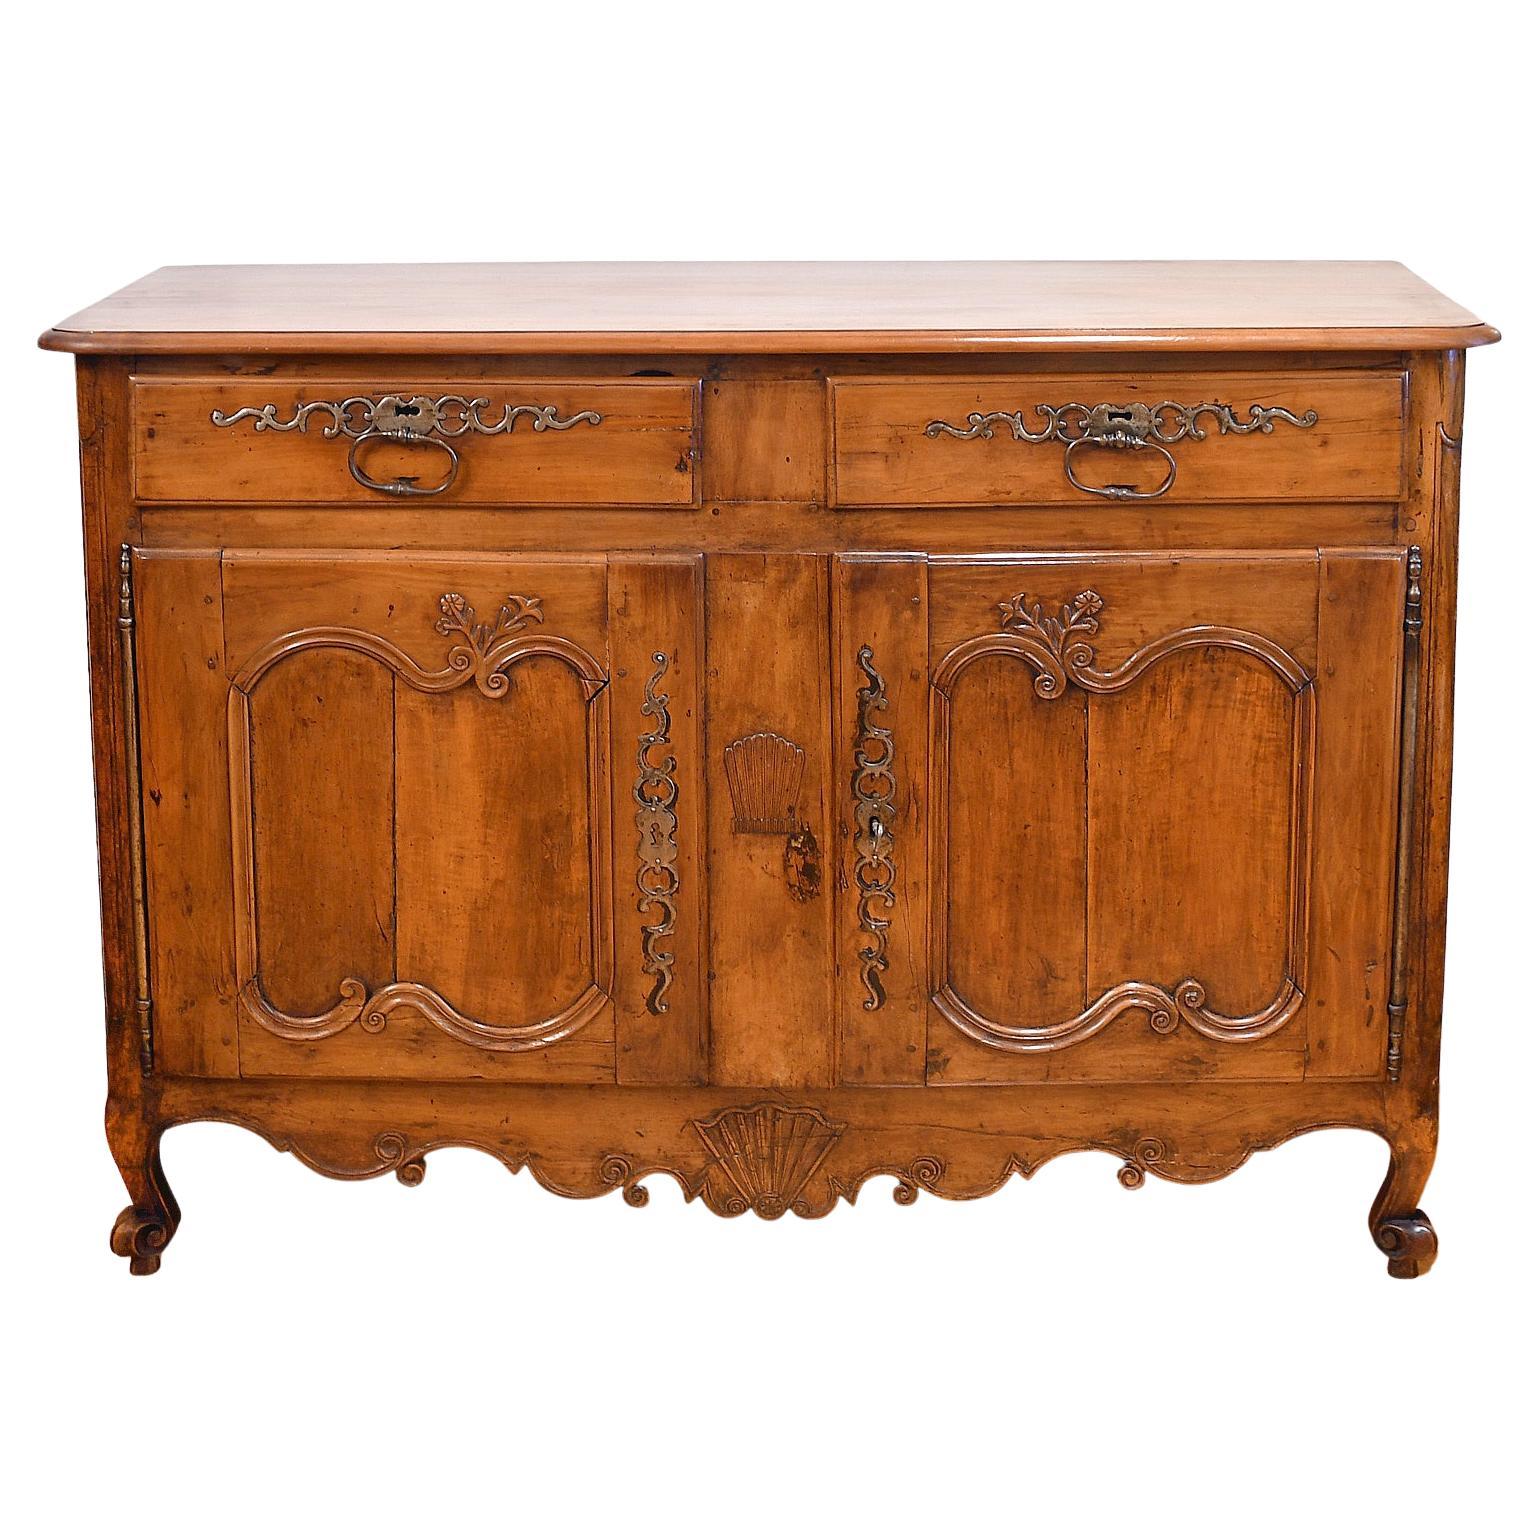 A beautiful 18th century French buffet/ sideboard in cherry wood with rounded bevel-edged, rectangular top resting on a base with two drawers over two cabinet doors. This graceful buffet showcases the stylistic features made popular during the long